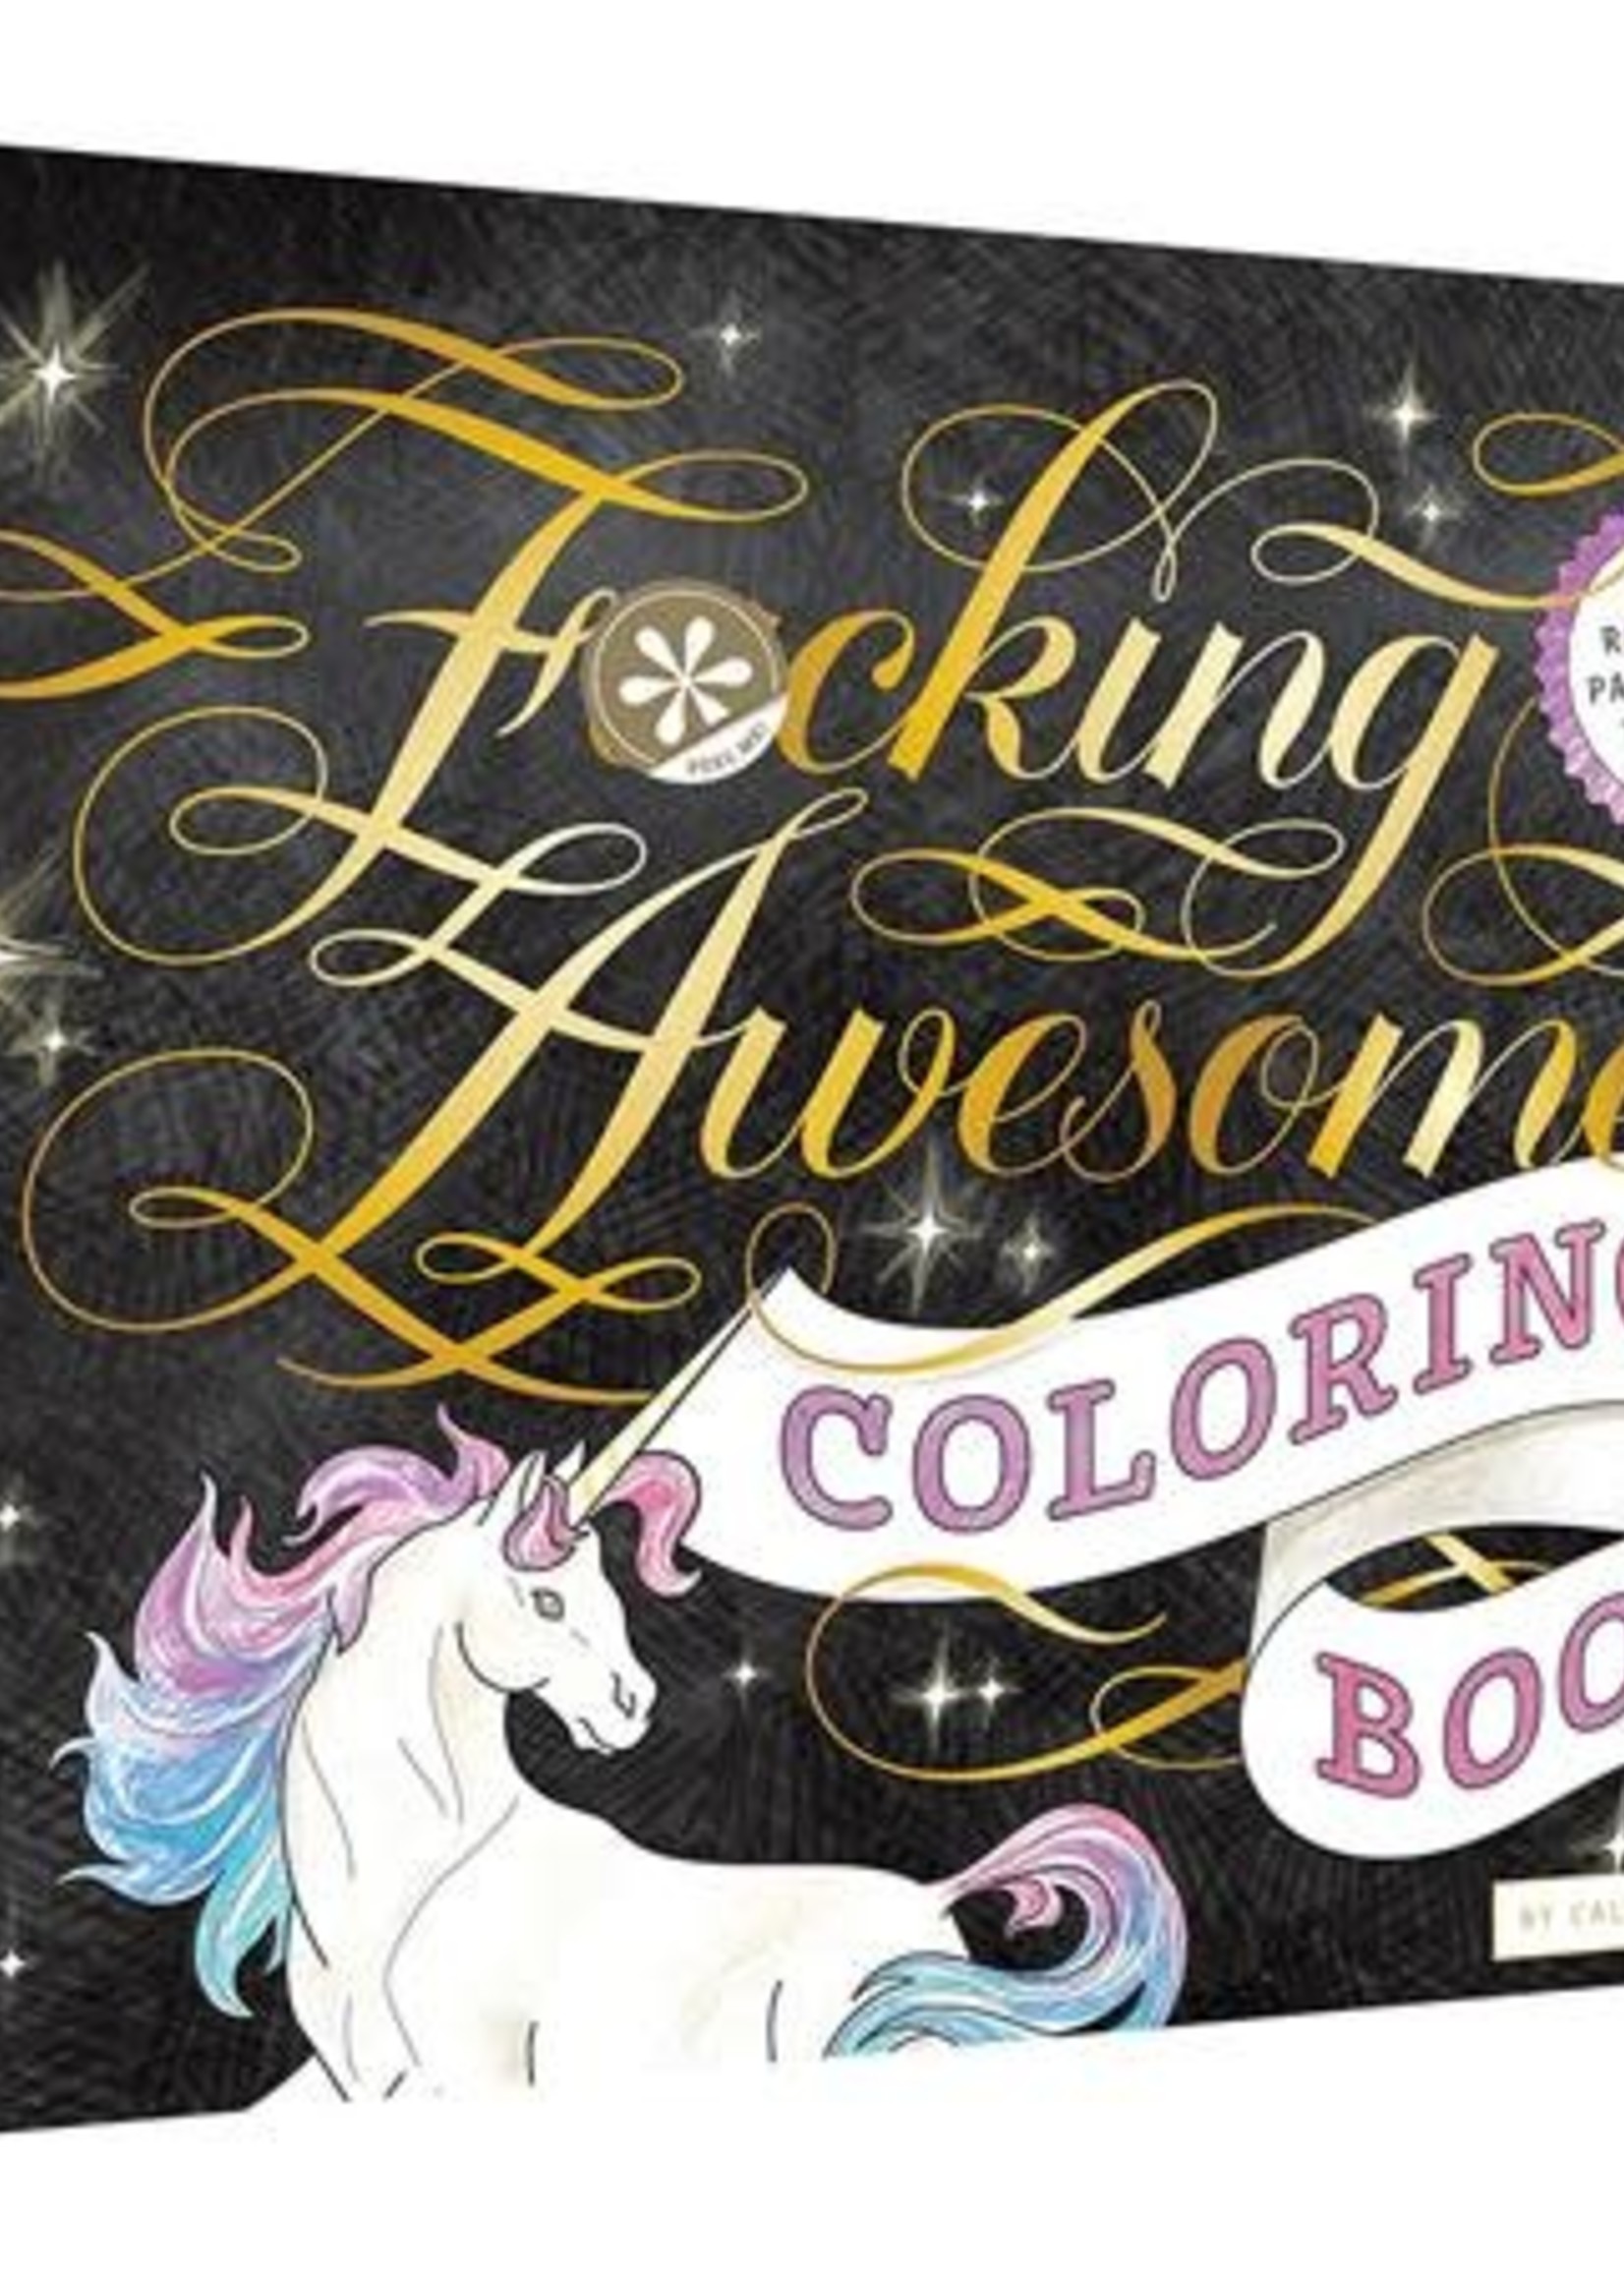 Fucking Awesome Coloring Book by Calligraphuck